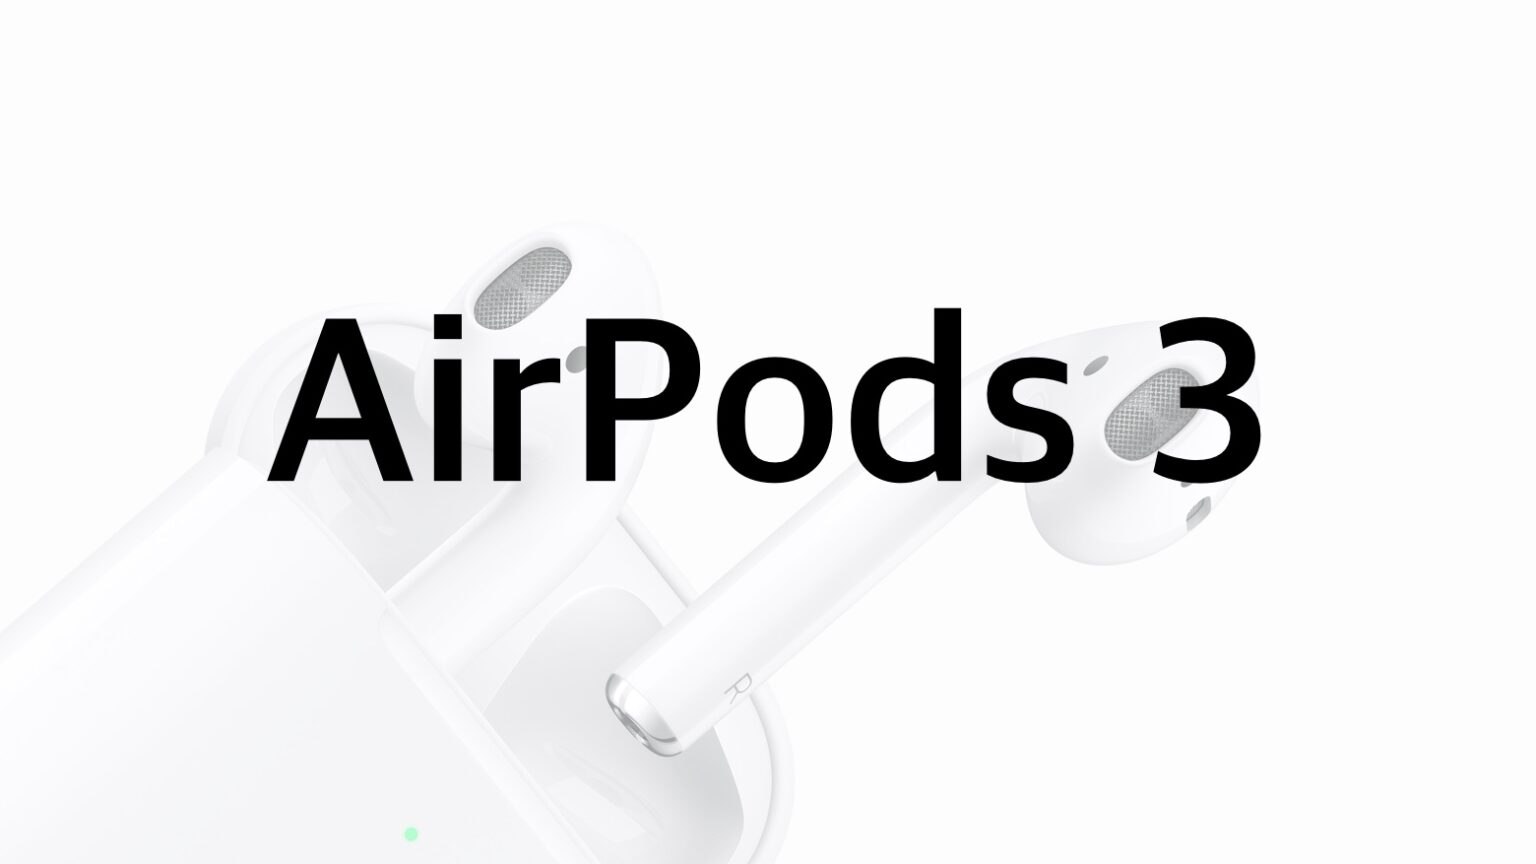 AirPods 3 might borrow some features of AirPods Pro.